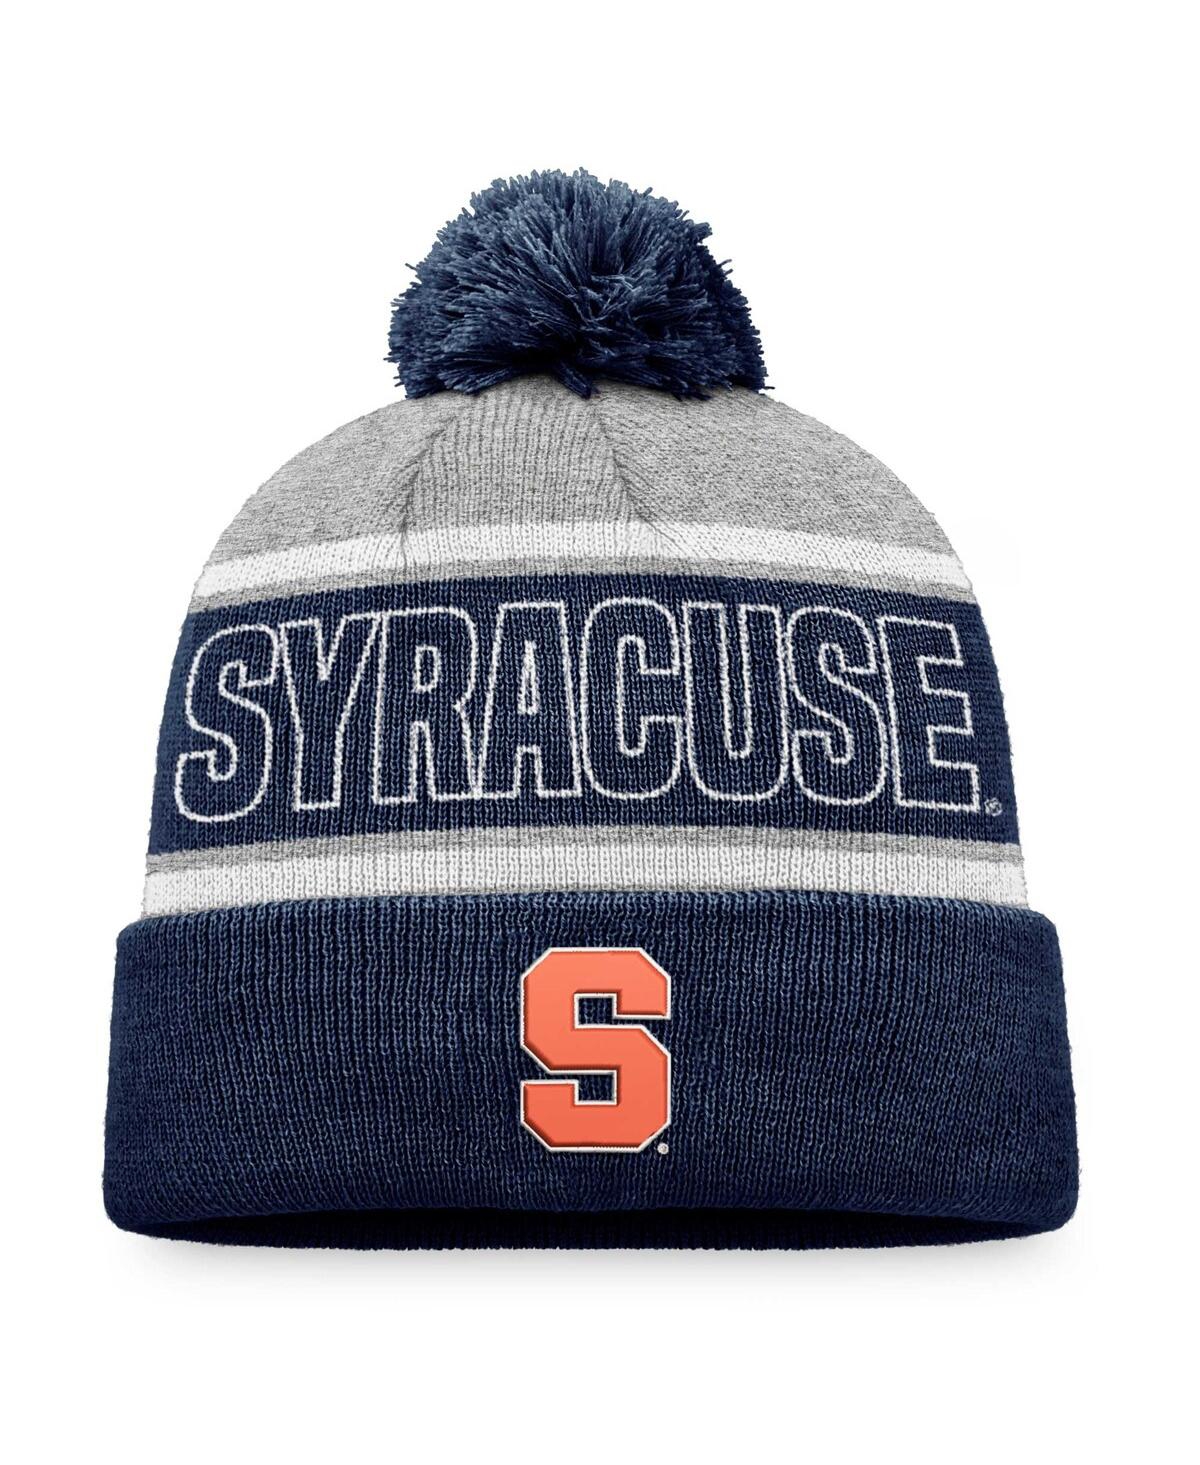 Top Of The World Men's  Navy, Heather Gray Syracuse Orange Cuffed Knit Hat With Pom In Navy,heather Gray